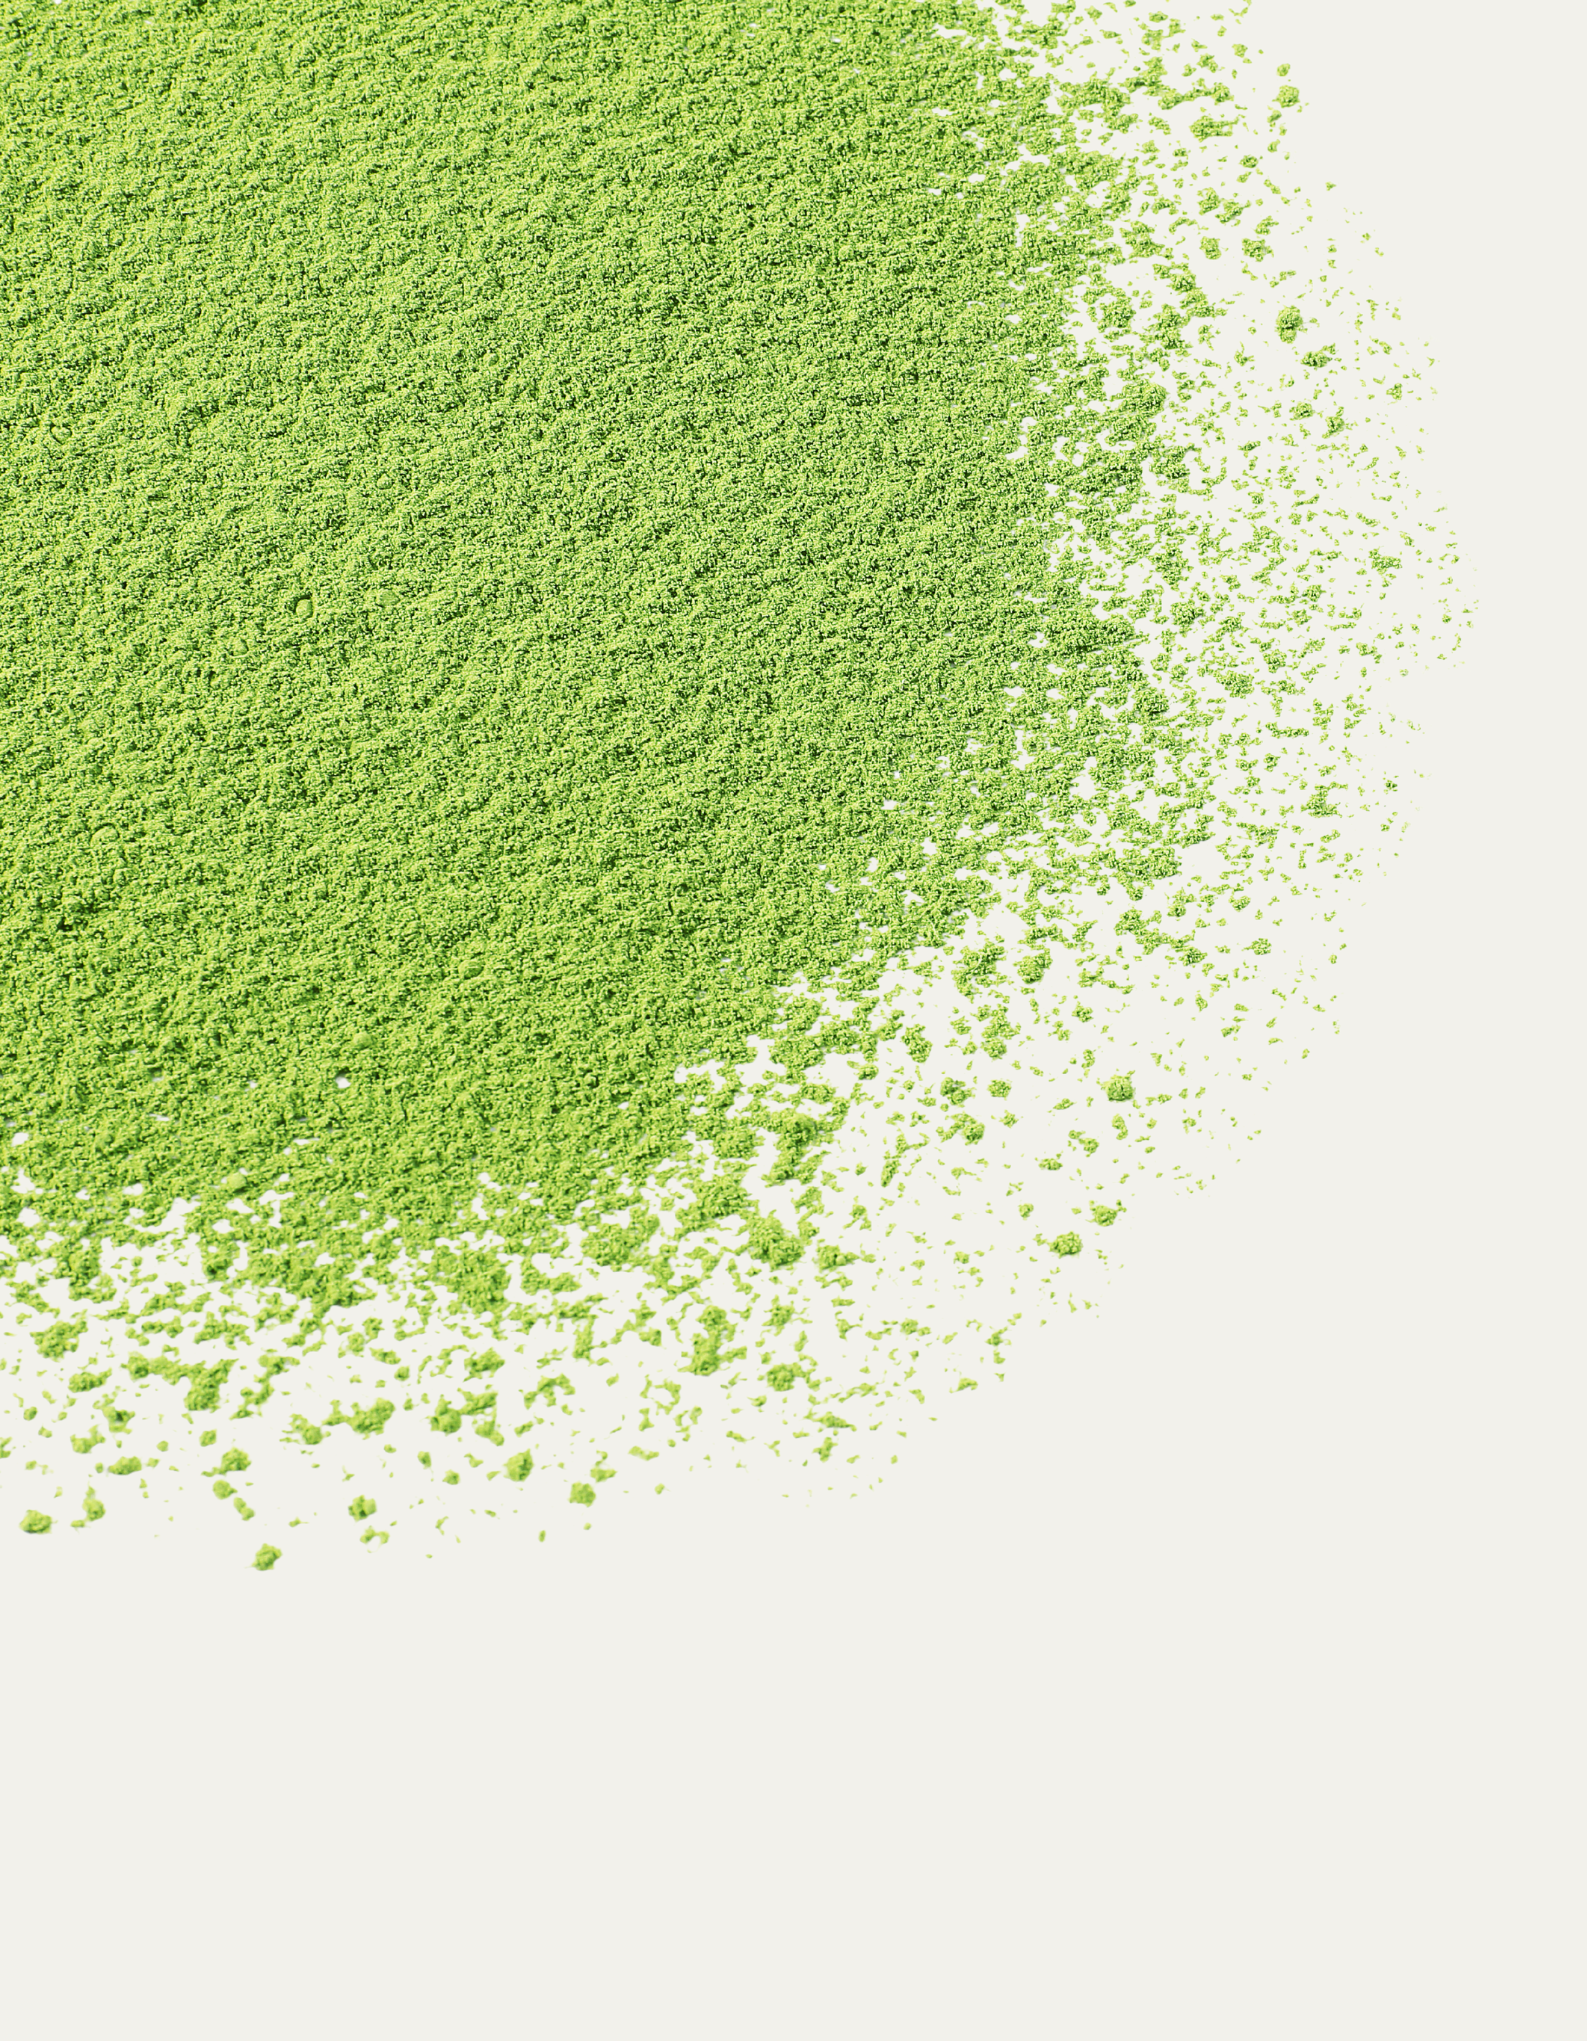 matcha powder from The Earthy